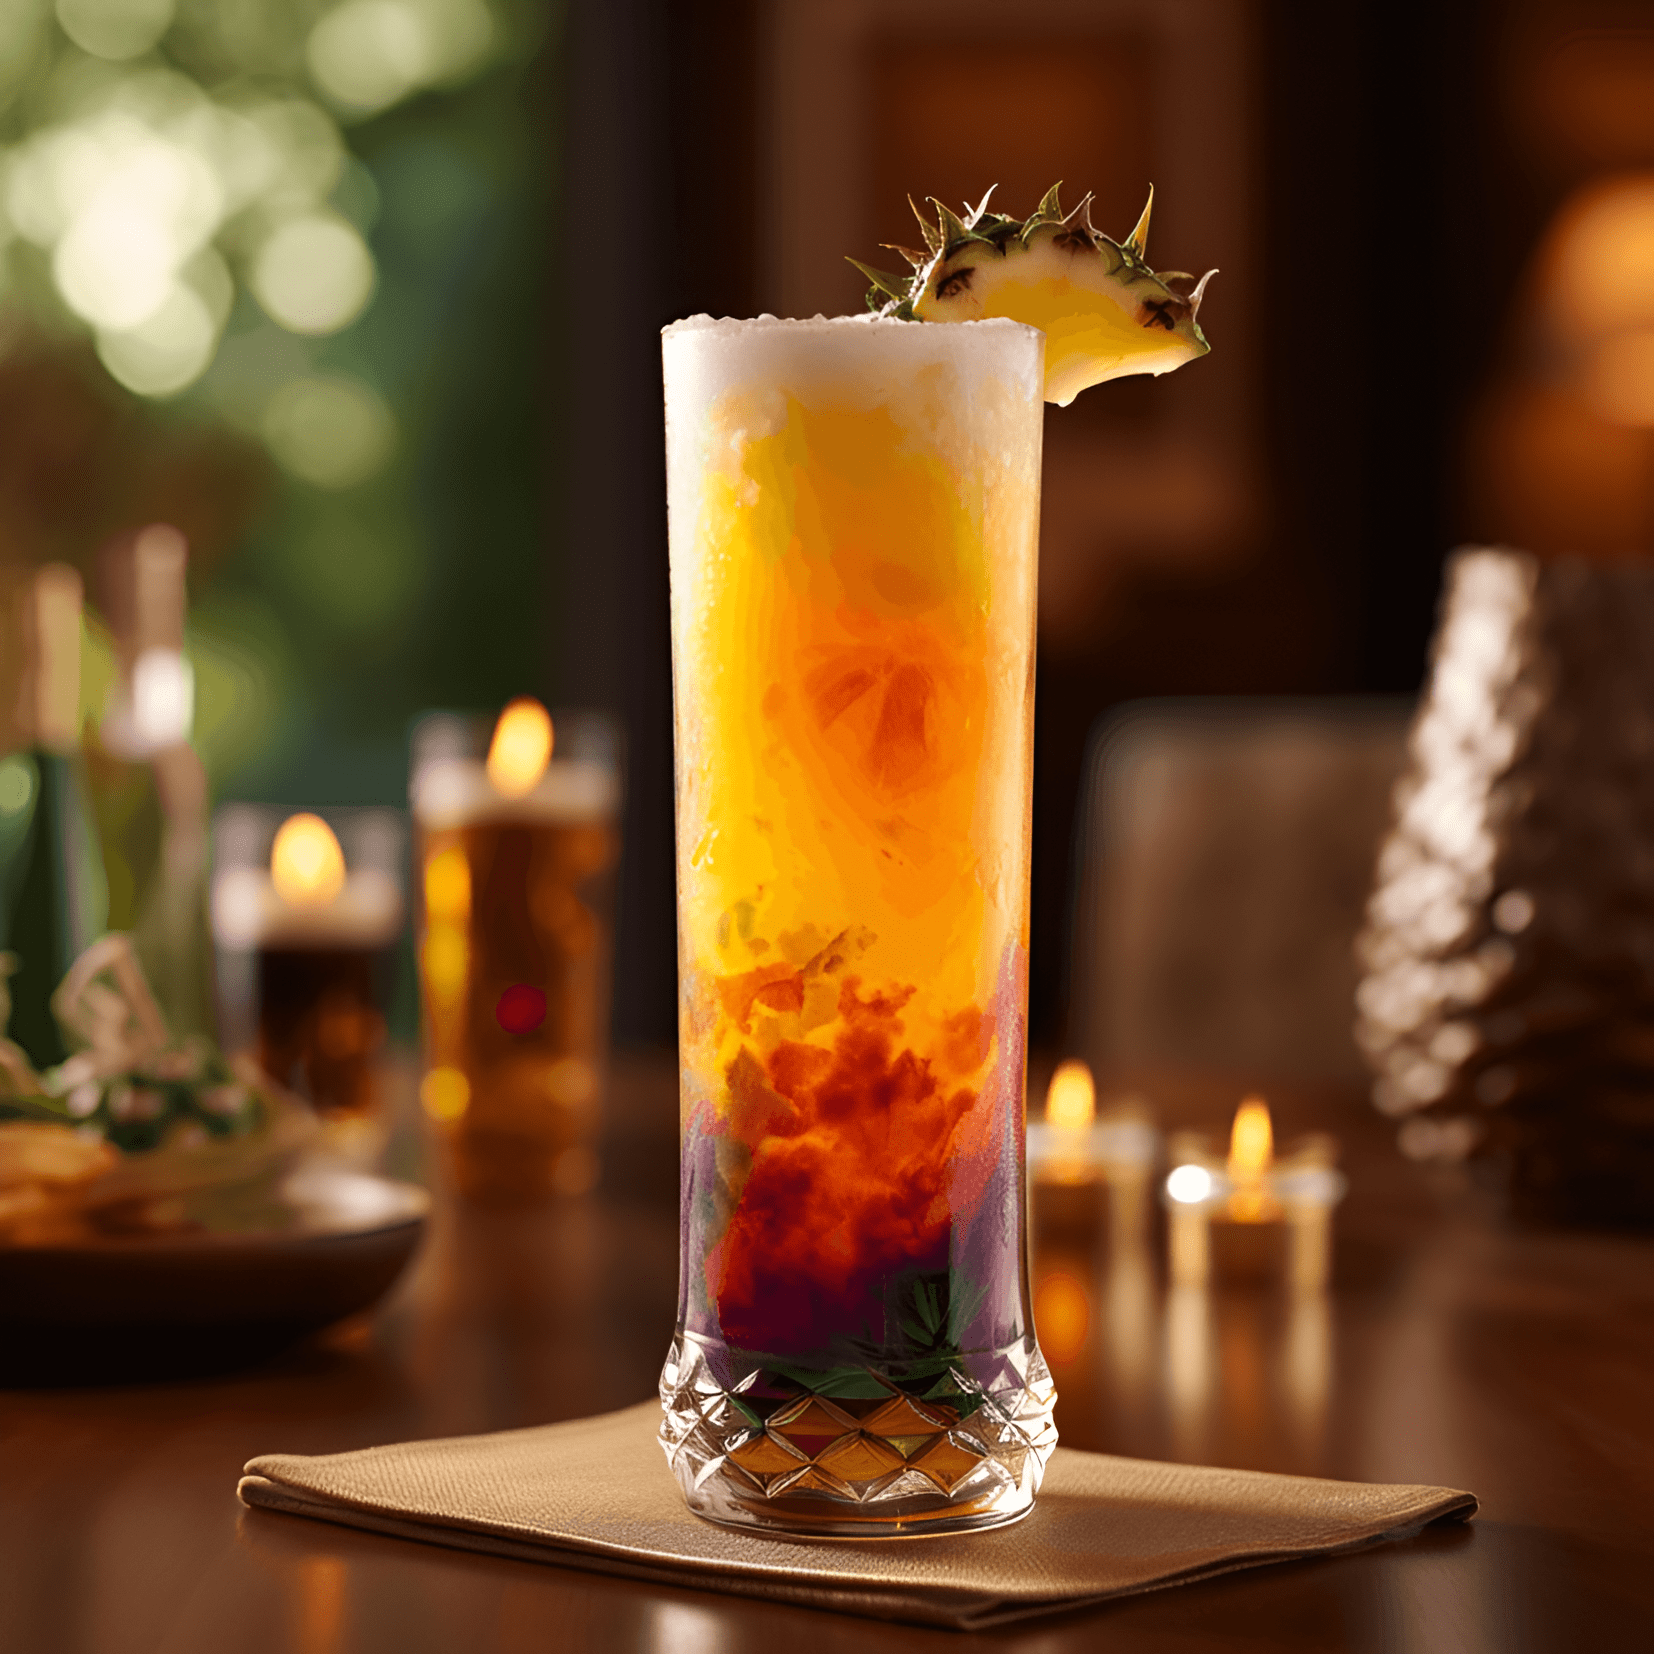 The Ulanda cocktail is a delightful blend of sweet, sour, and slightly spicy flavors. The fruity notes from the pineapple and passion fruit are balanced by the tangy lime and the subtle heat from the ginger. The rum adds a rich, smooth undertone, making this cocktail a refreshing and invigorating treat.